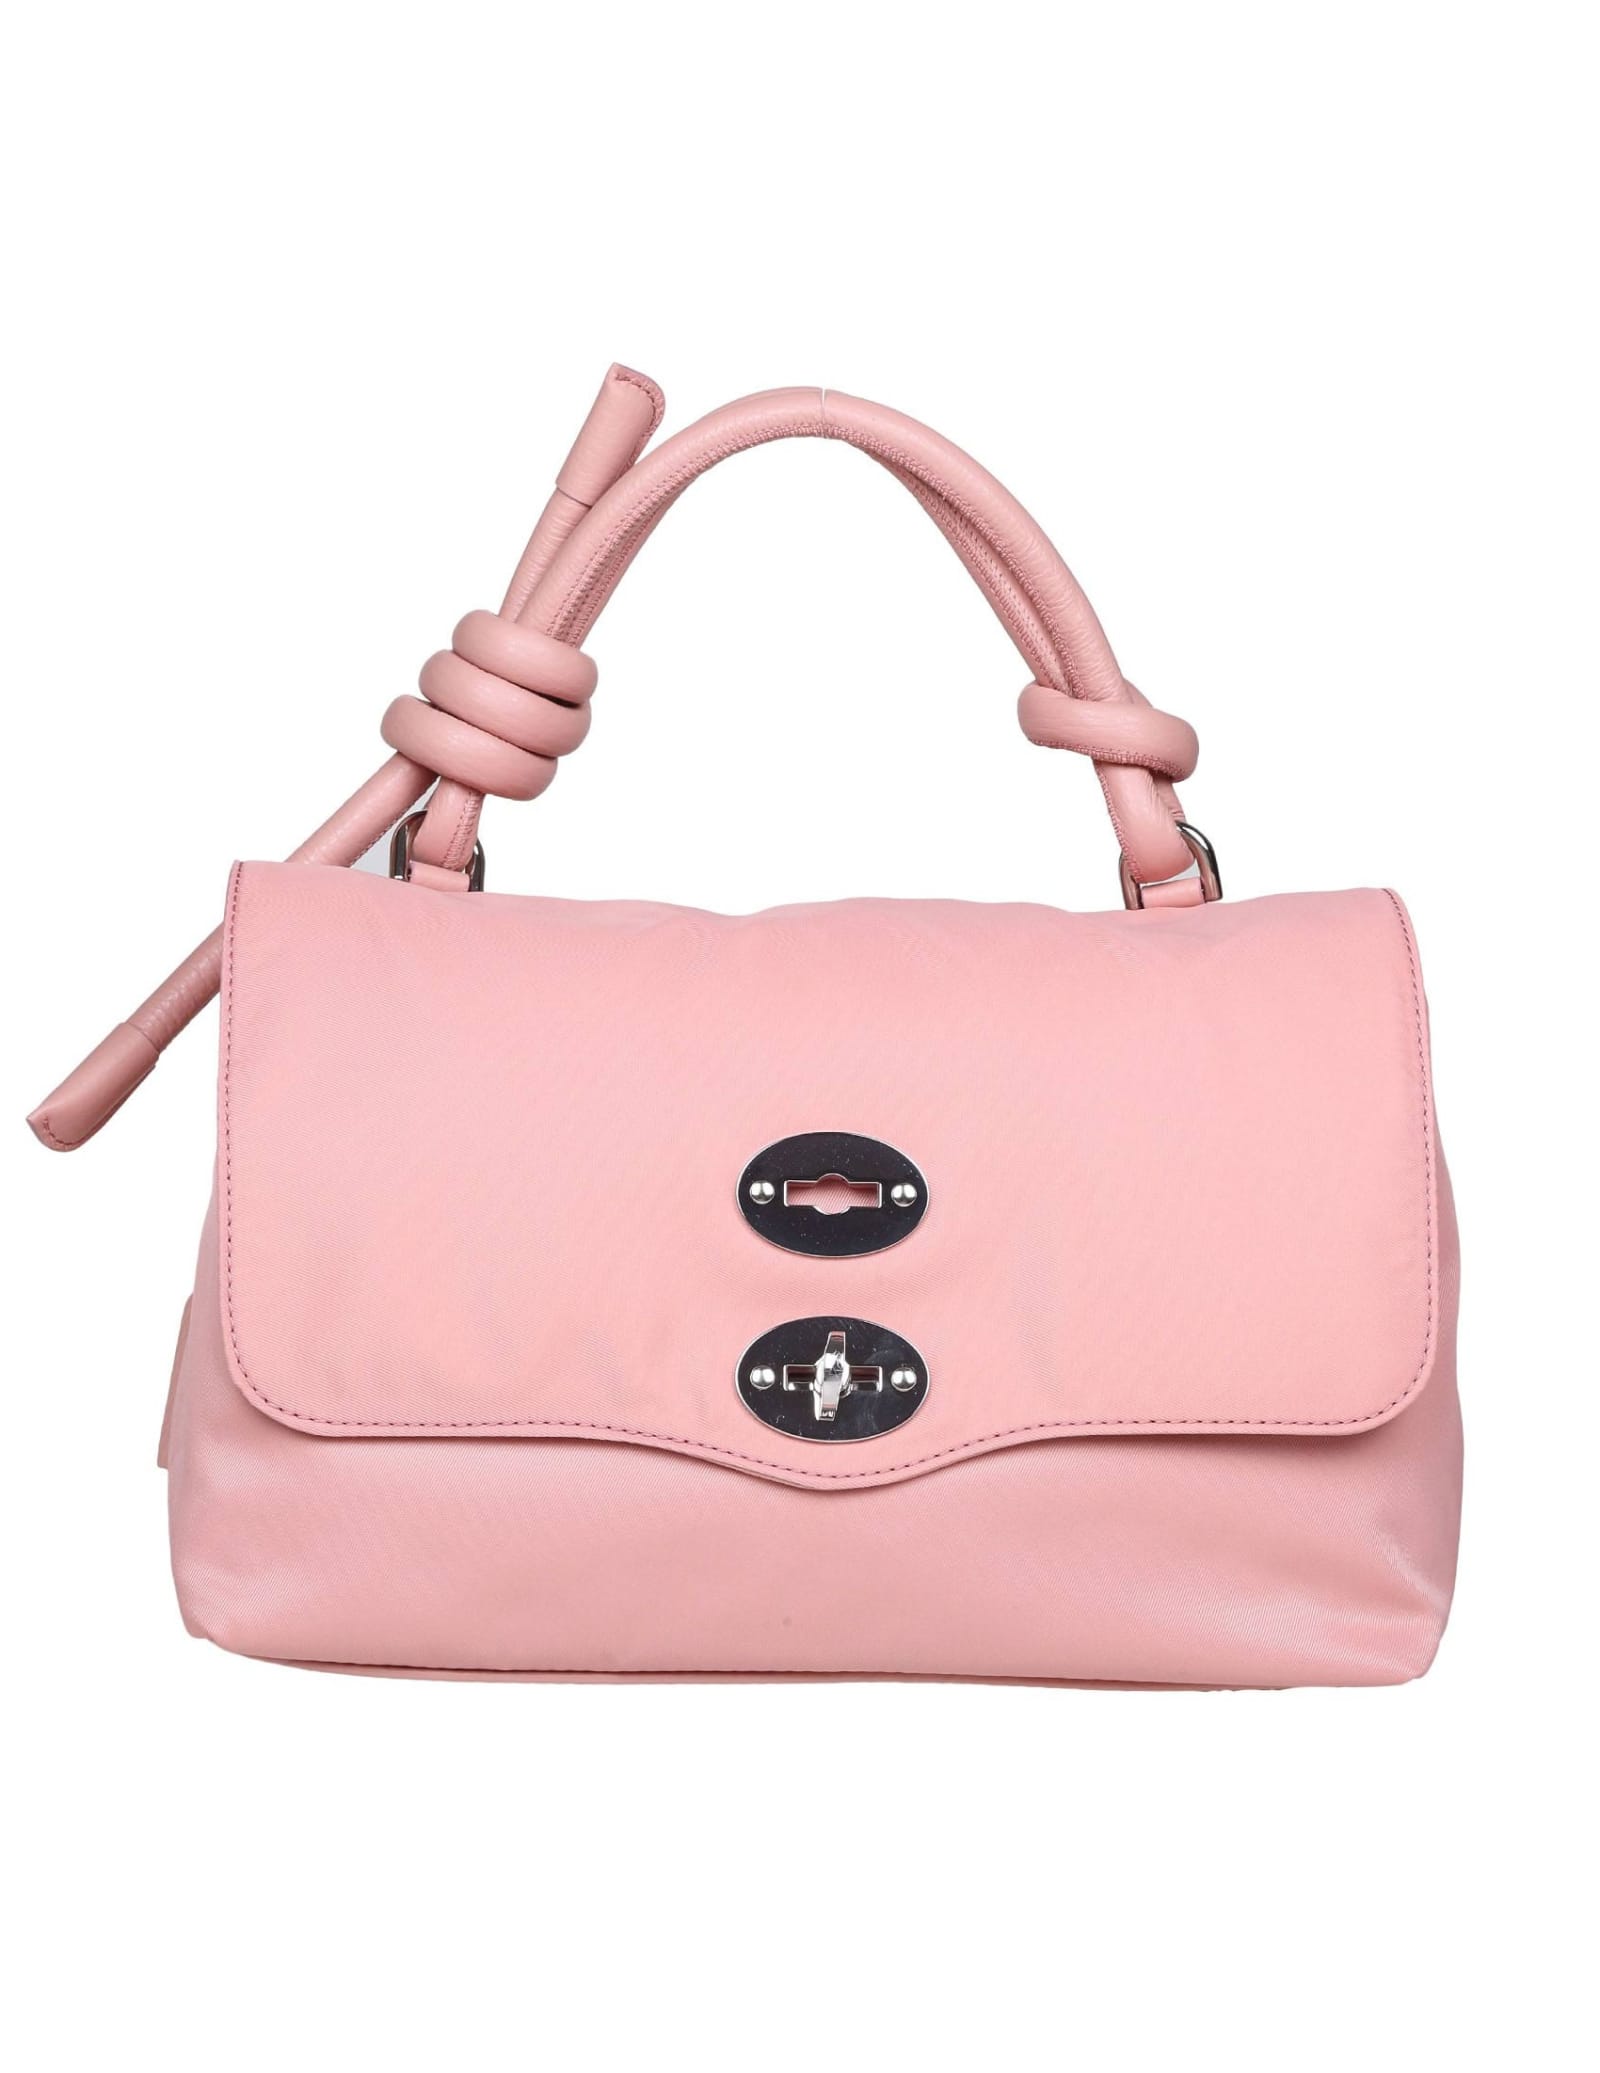 Zanellato Shiny Nylon Bag That Can Be Carried By Hand Or Over The Shoulder In Pink